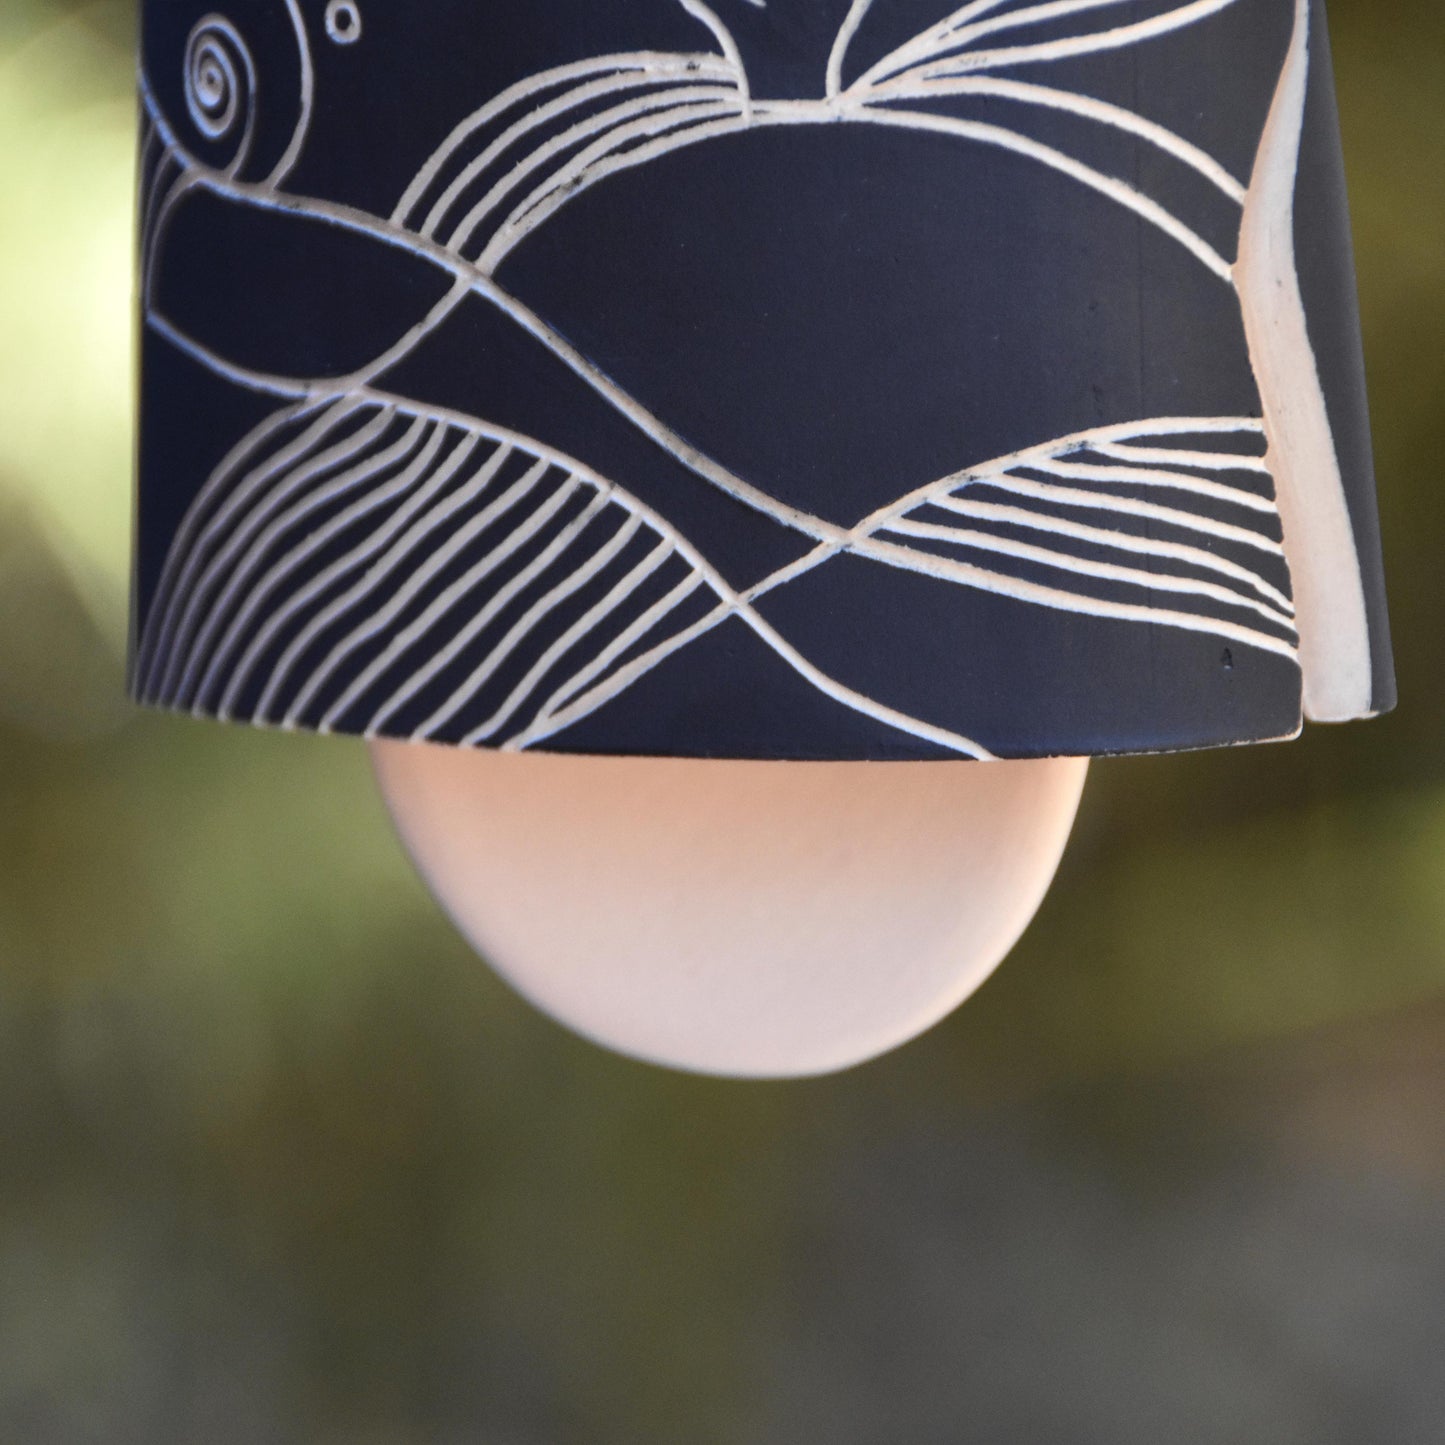 Starry Night Sgraffito Wind Chime Bell